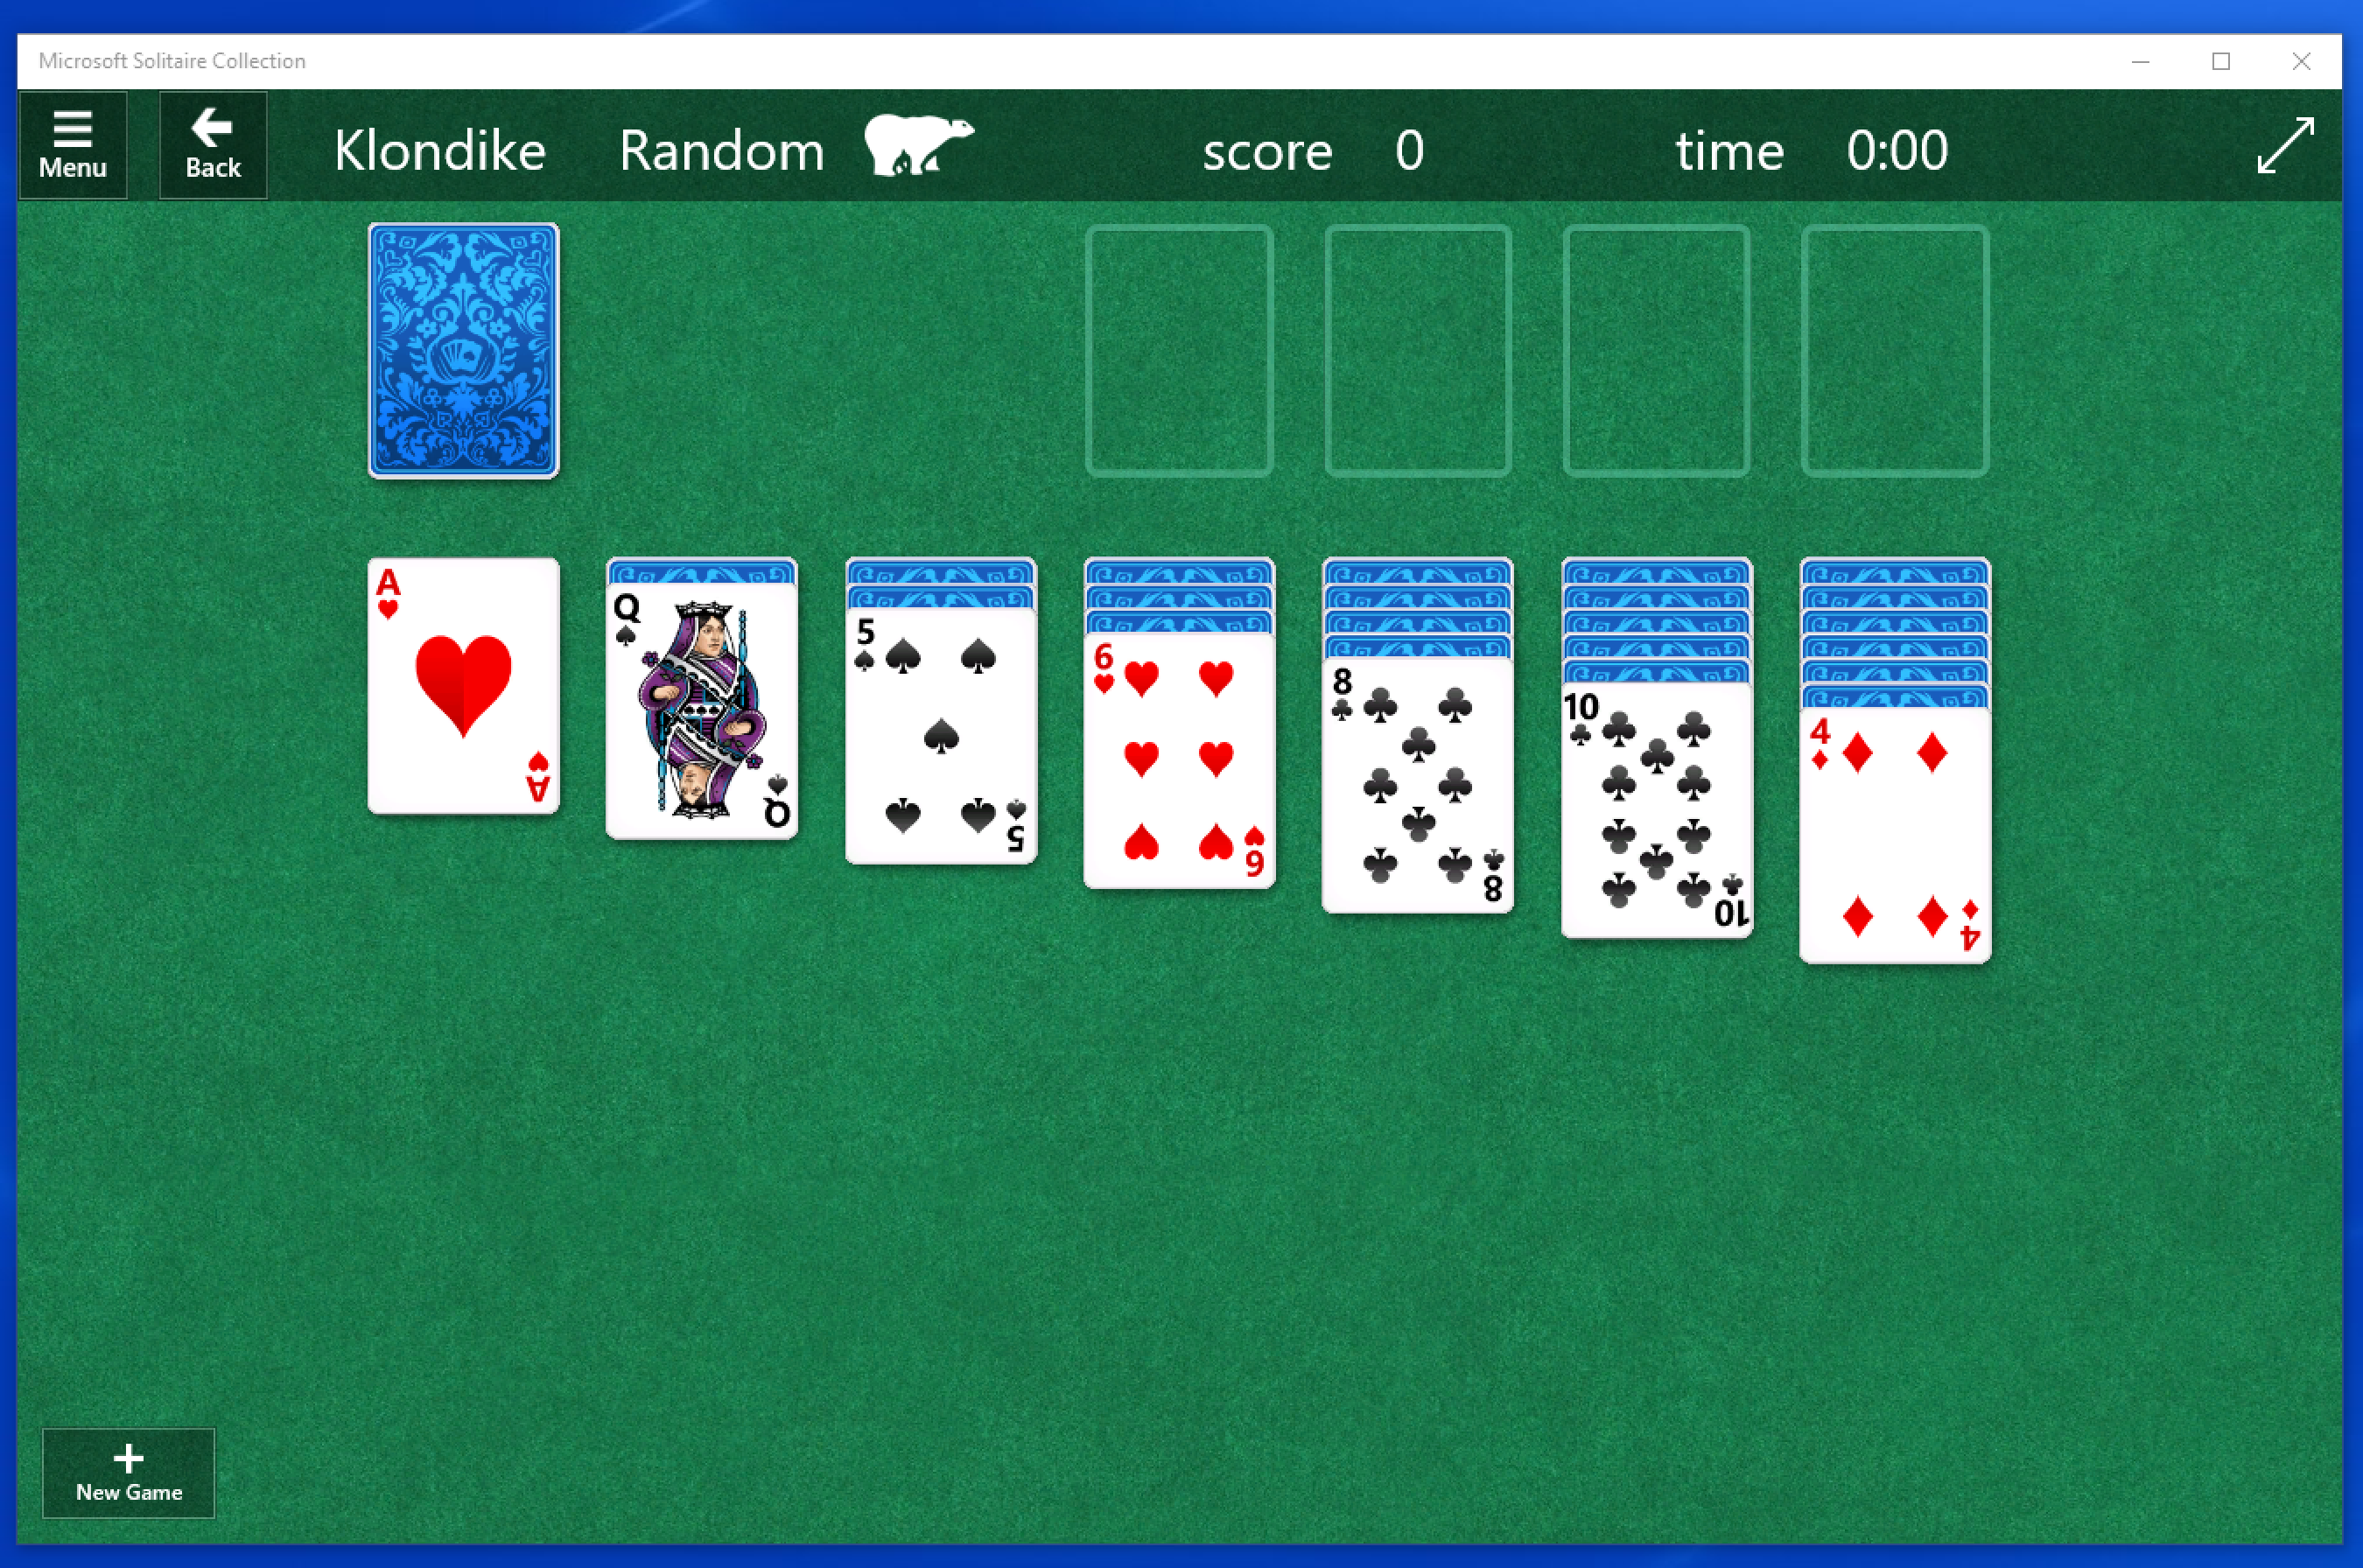 How to Play Solitaire on Windows 10? Ask Dave Taylor